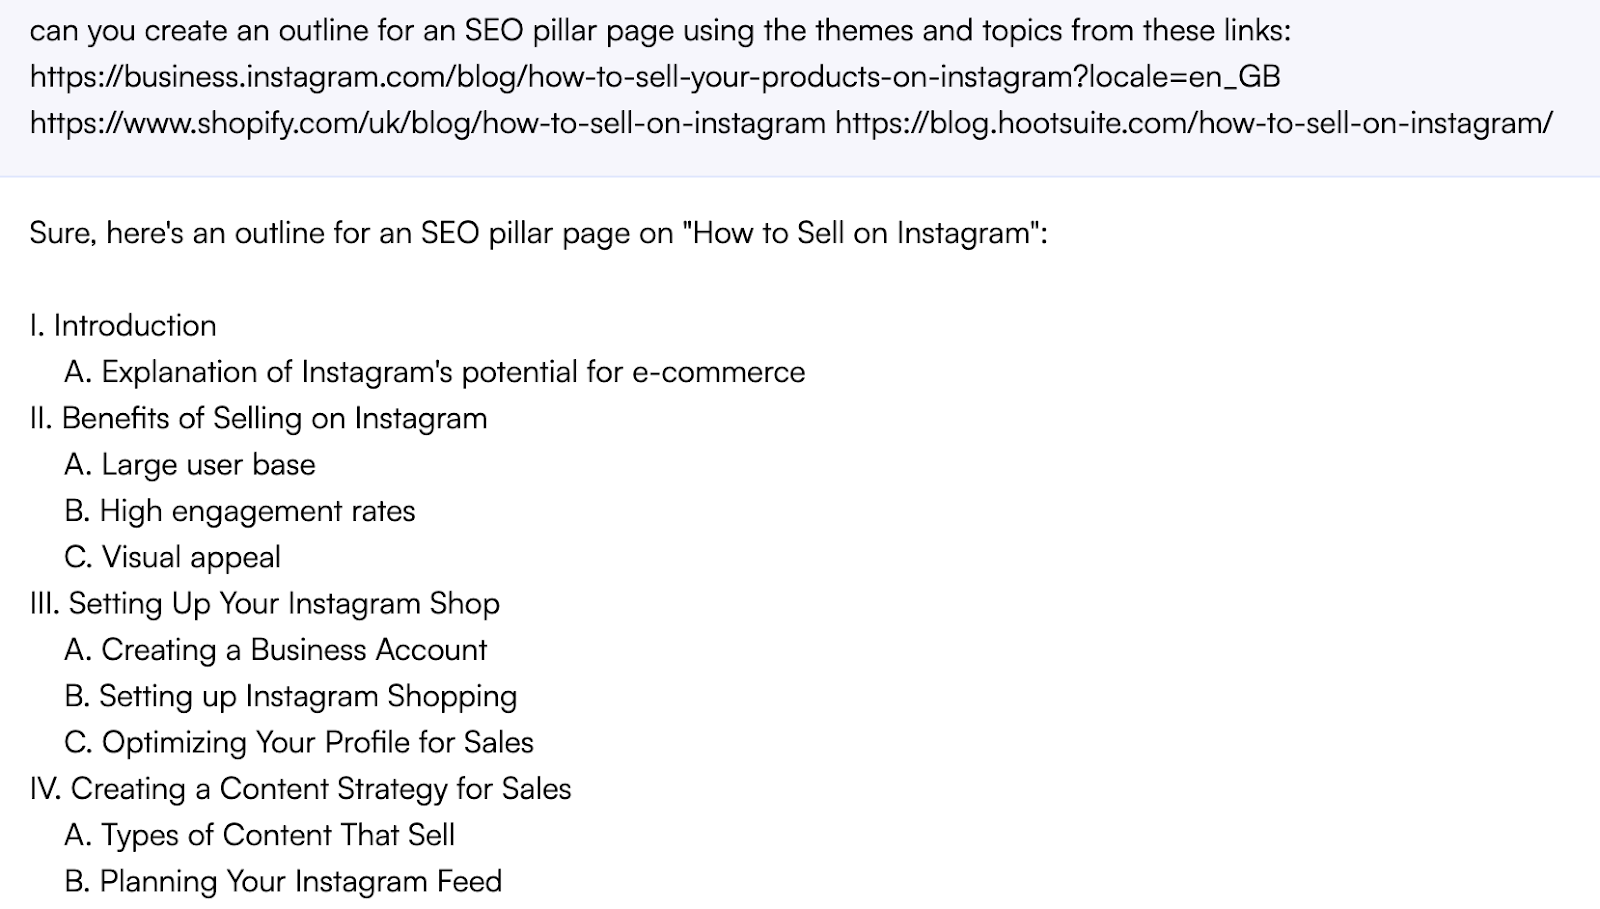 An AI-generated outline for an SEO pillar page on "How to Sell on Instagram."